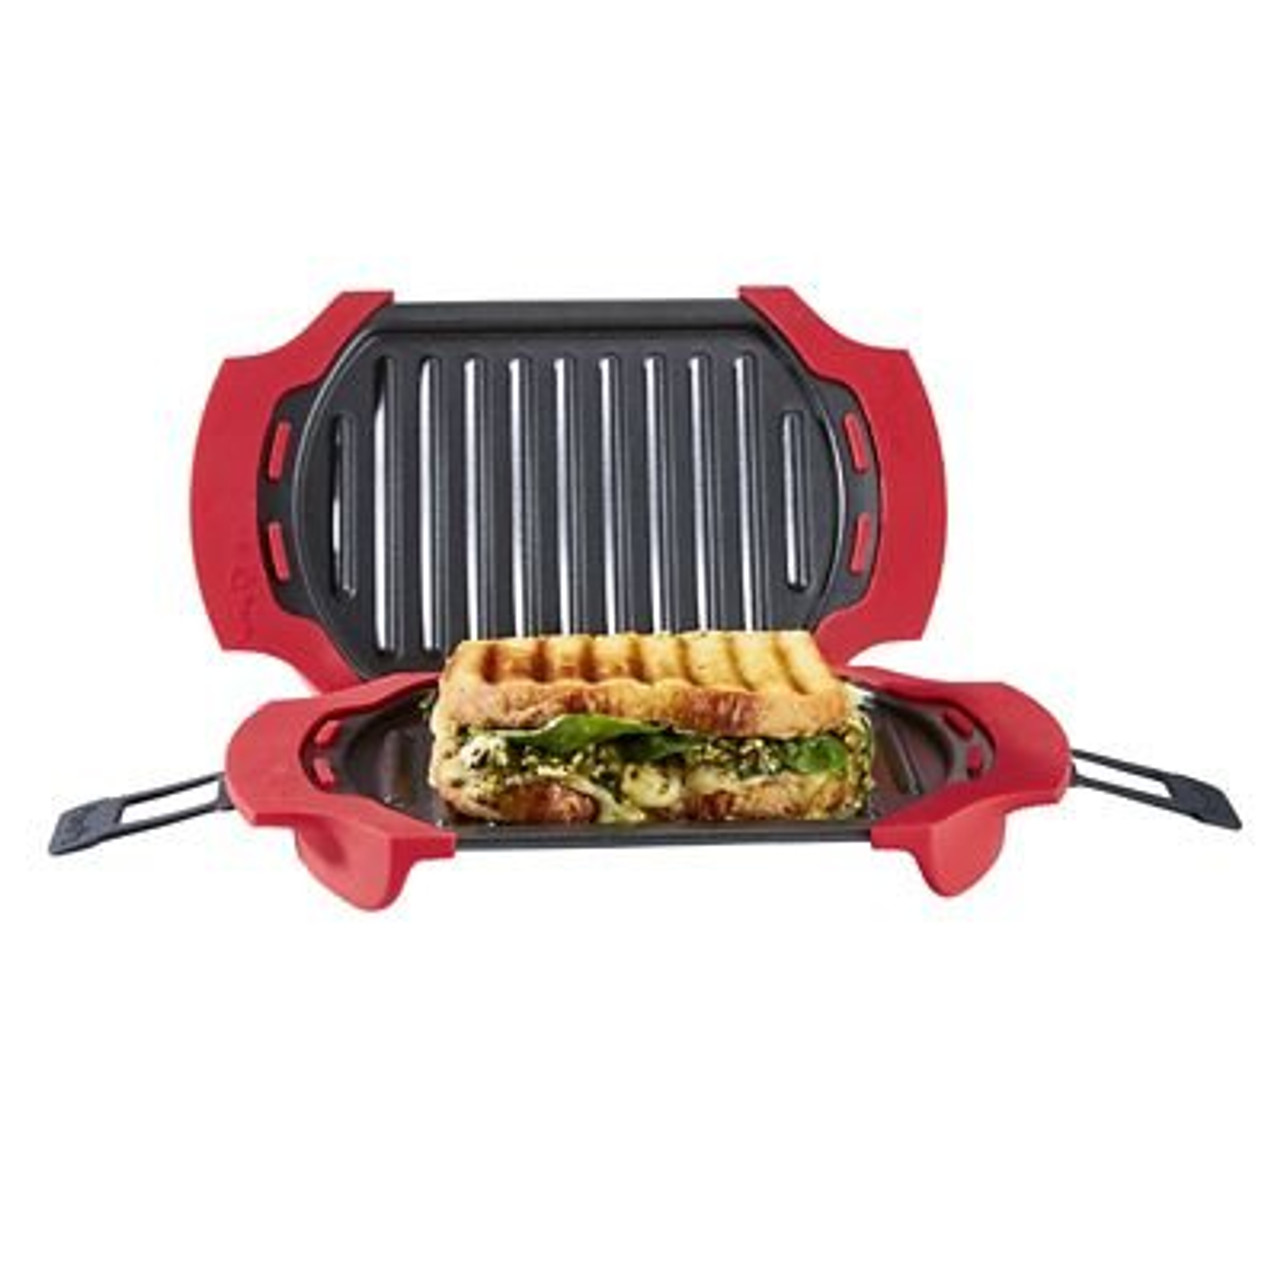 Lekue Microwave Grill, Sandwich Maker, Panini Press, 10 in x 5.7 in in, Red, Size: 10 x 5.7